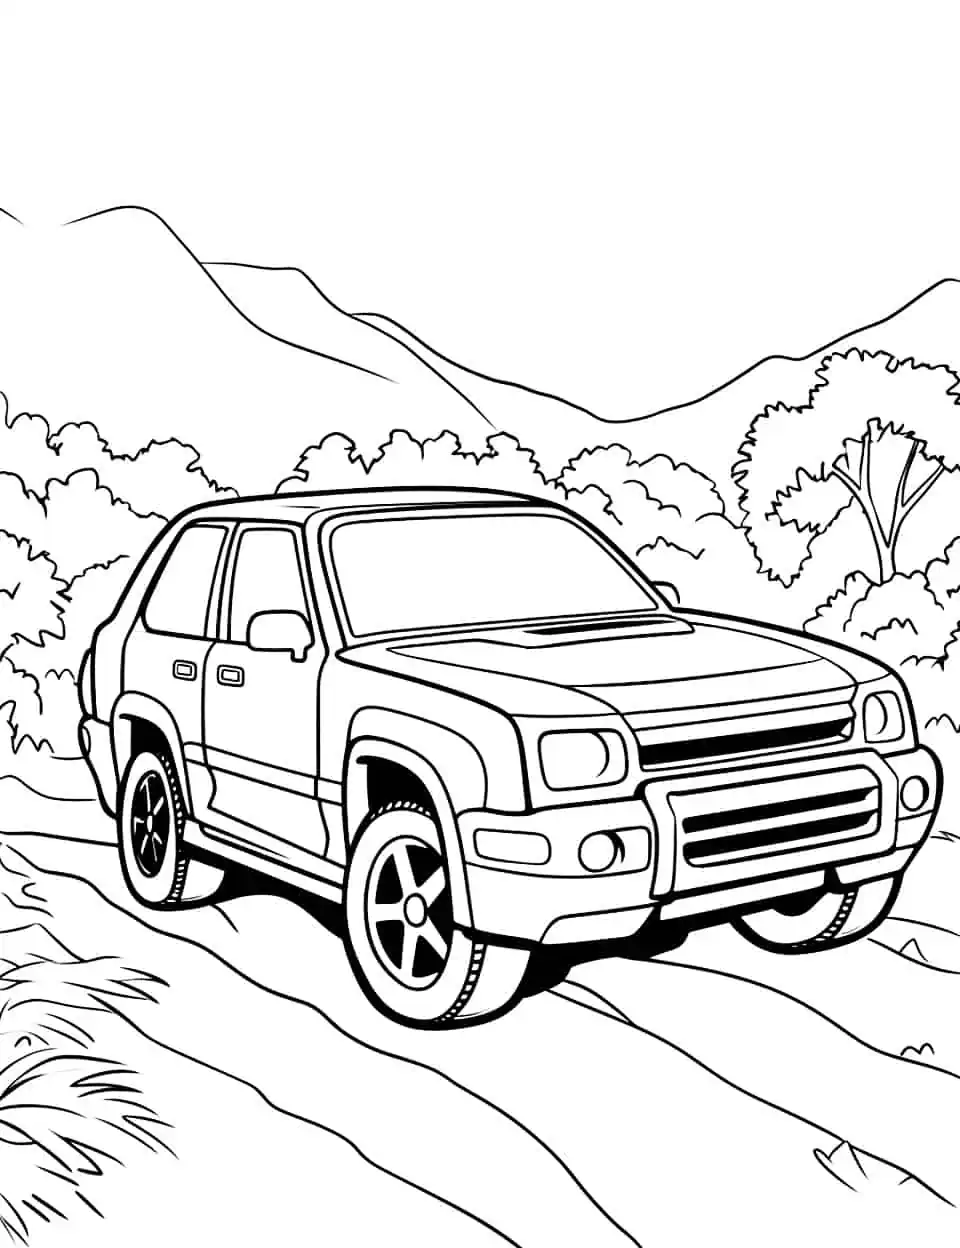 SUV in the Jungle Car Coloring Page - A rugged SUV navigating through a dense jungle.